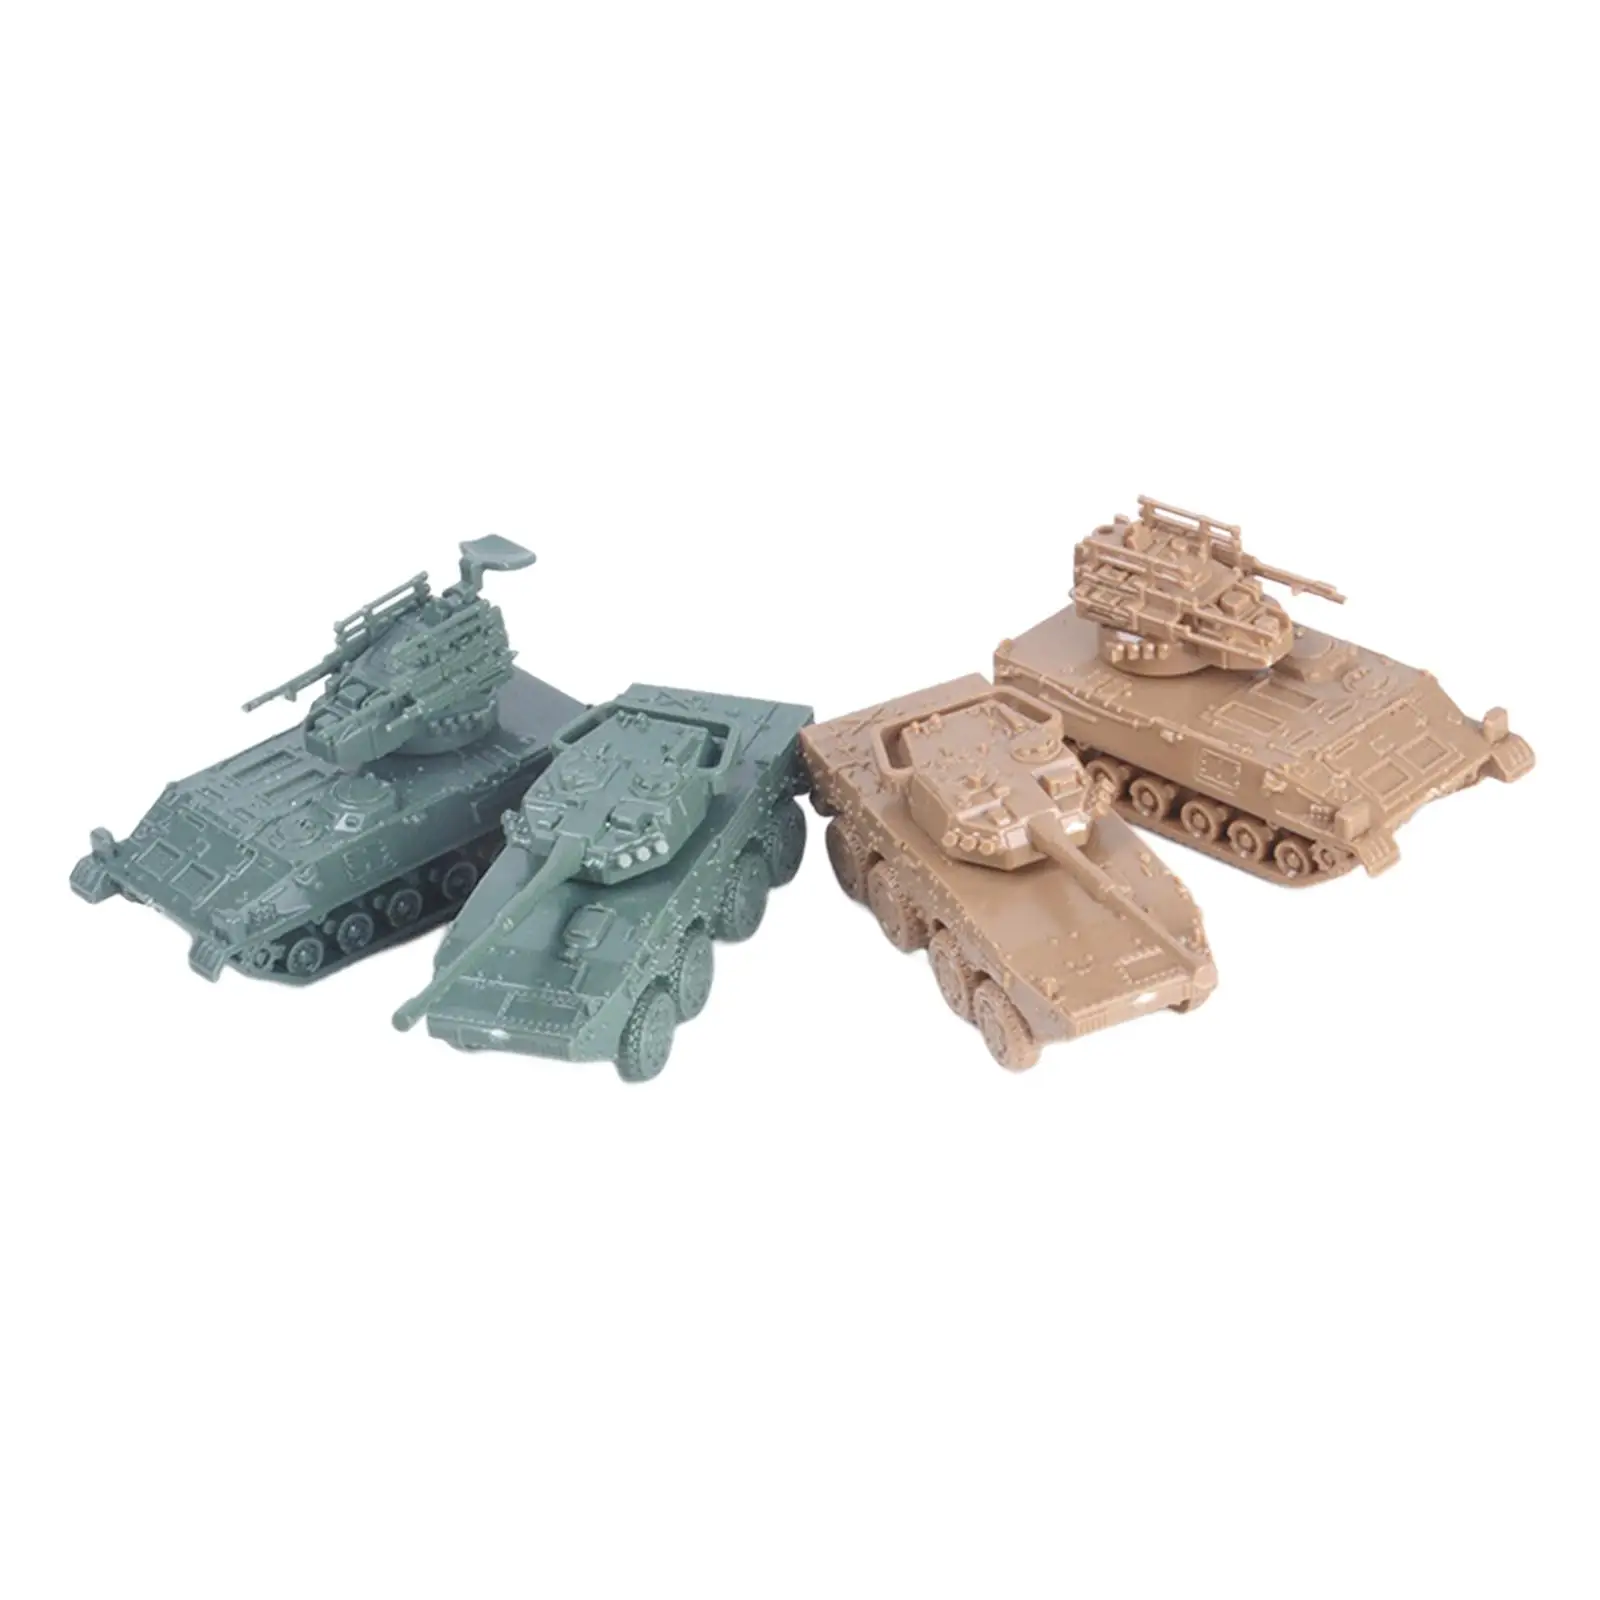 4x 1:144 Armored Tank Model Rotation Fort Reconnaissance Vehicles Puzzle for Children Adults Table Scene Keepsake Collectibles